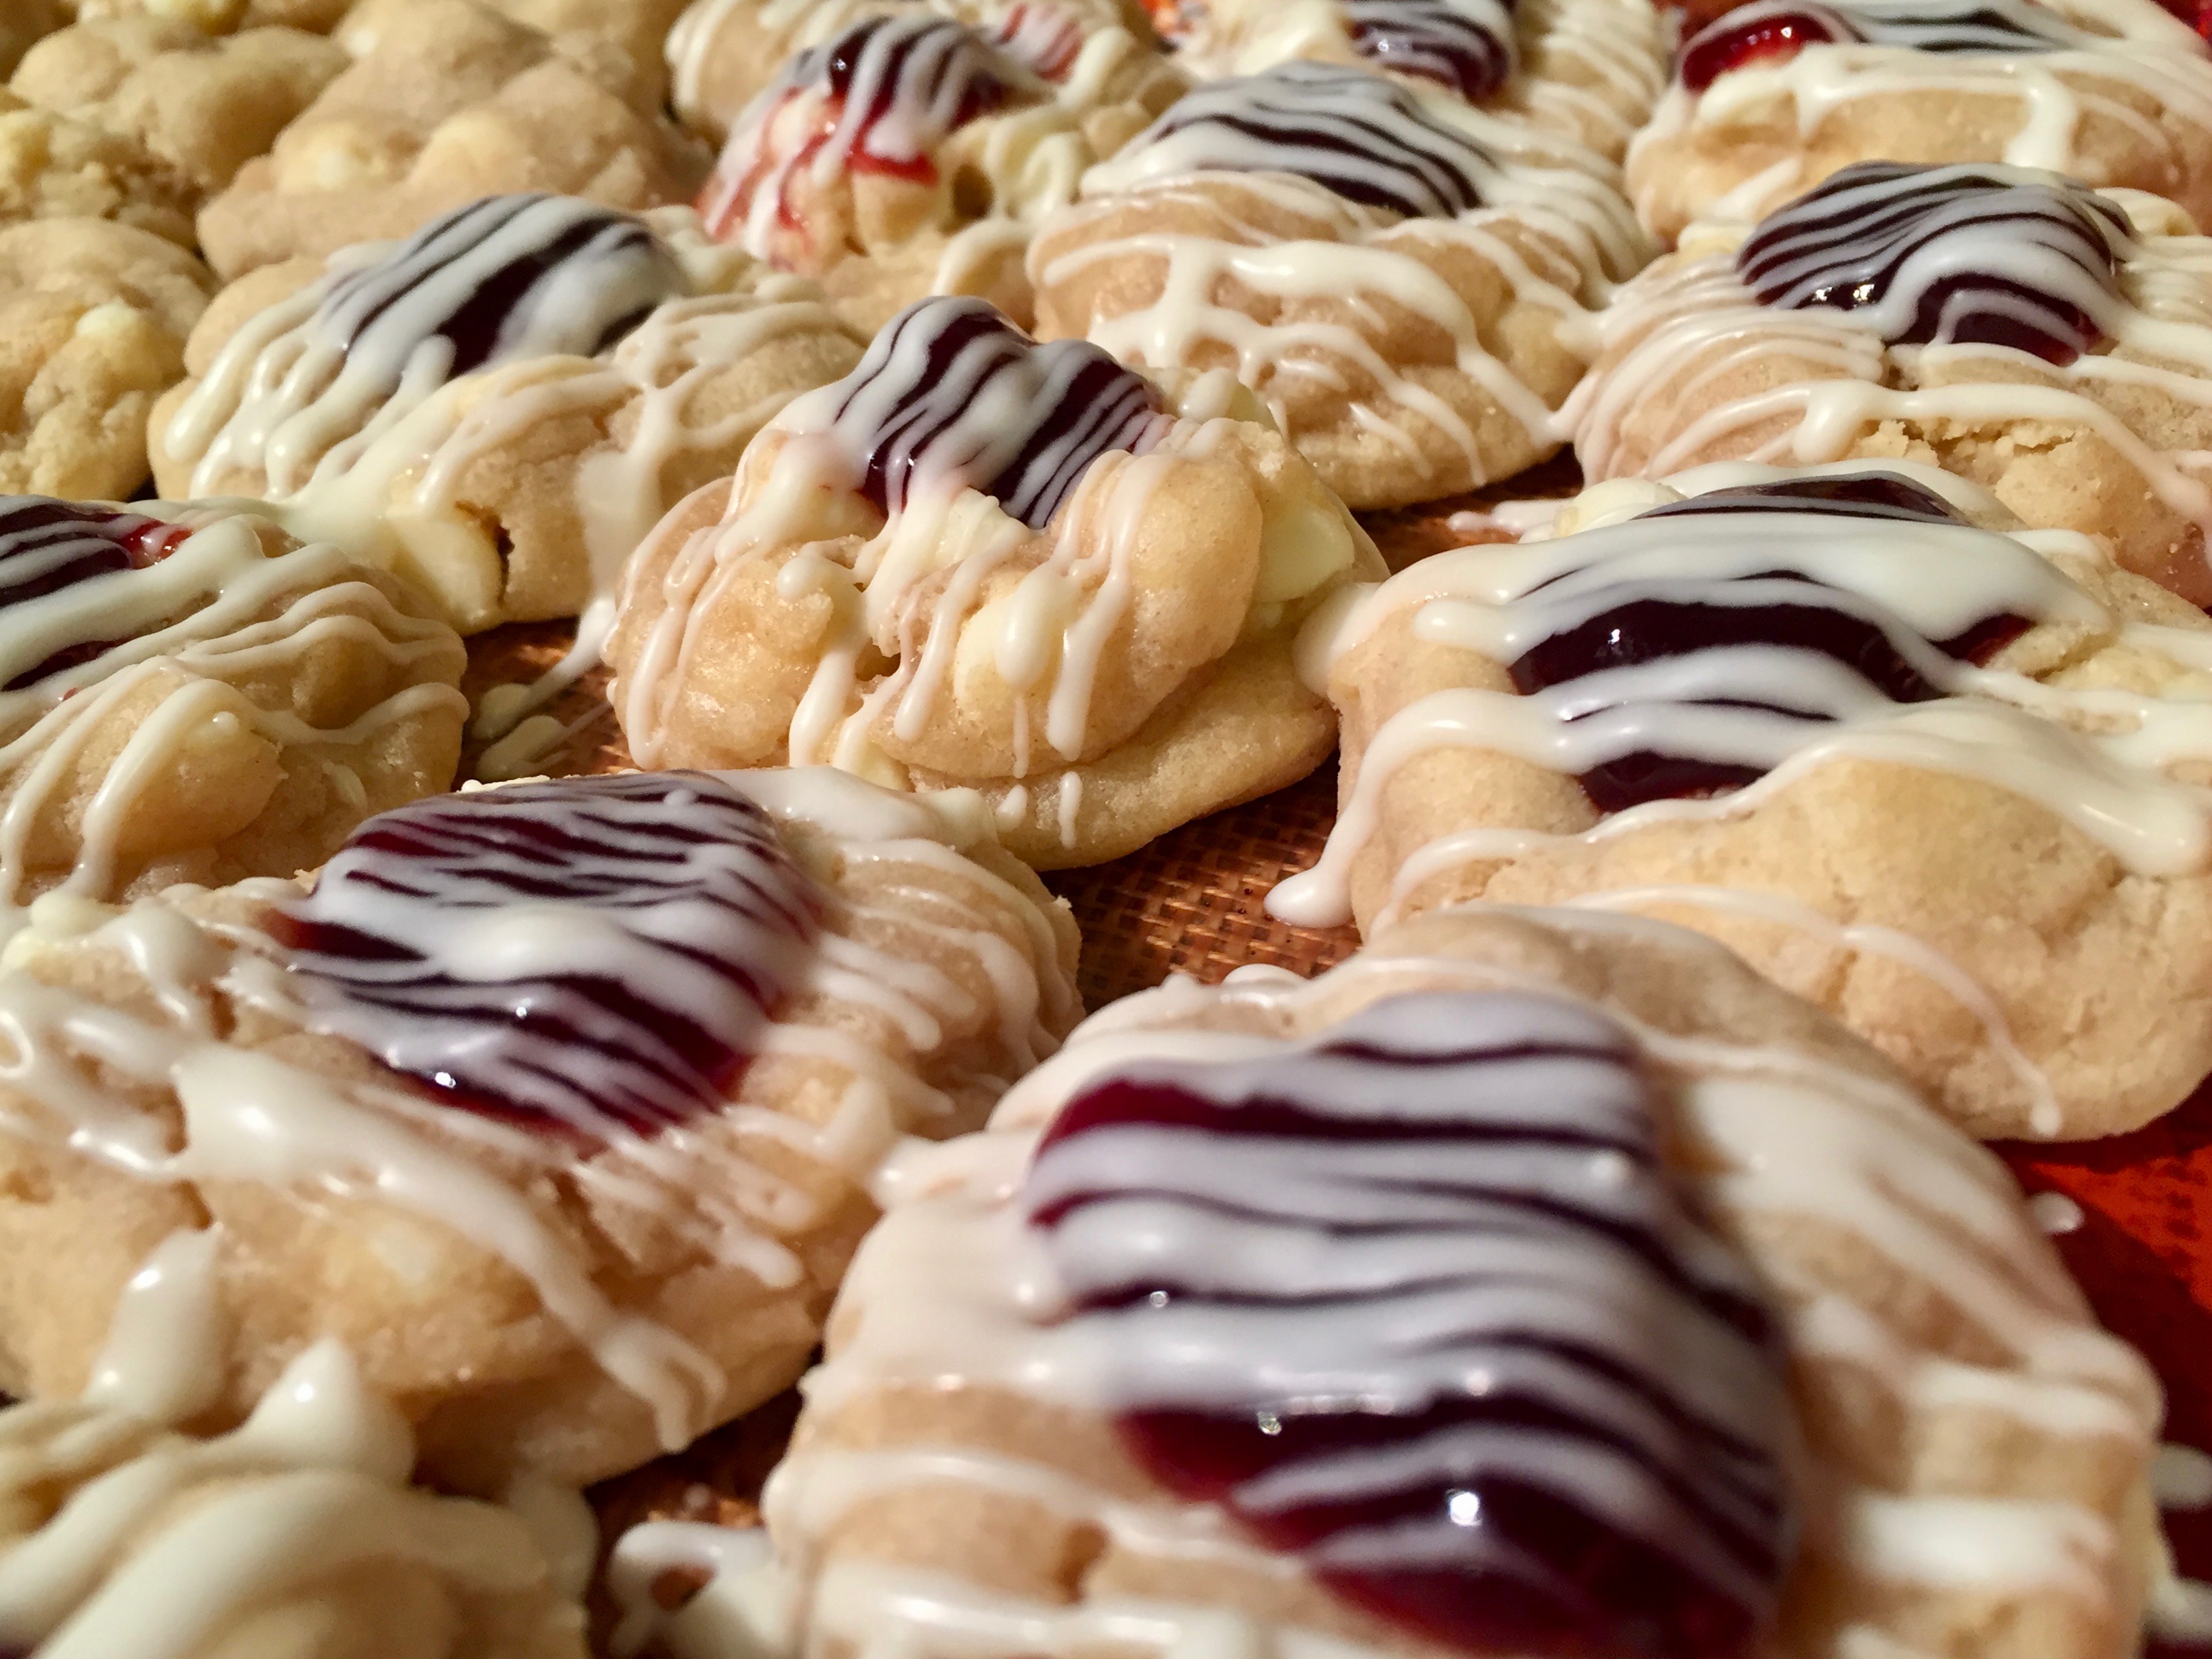 White Chocolate Raspberry Cookies with White Chocolate Drizzle